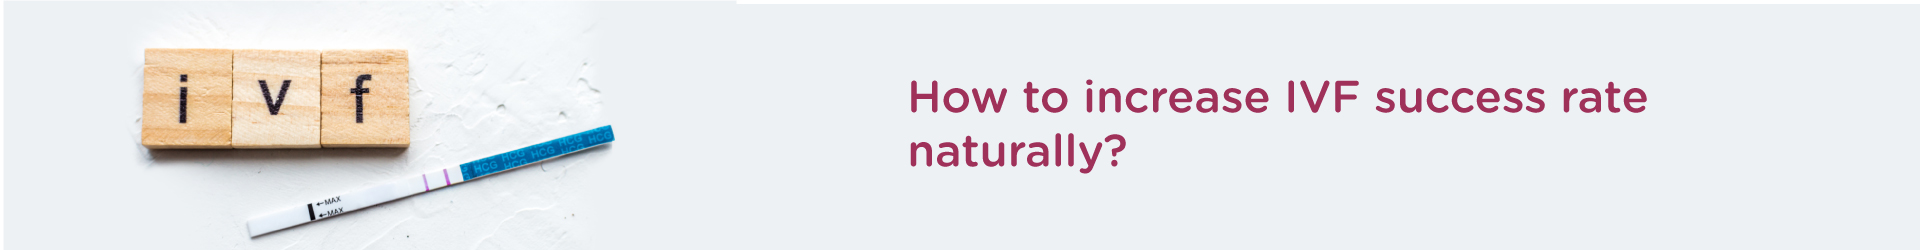 How to Increase IVF Success Rate Naturally?